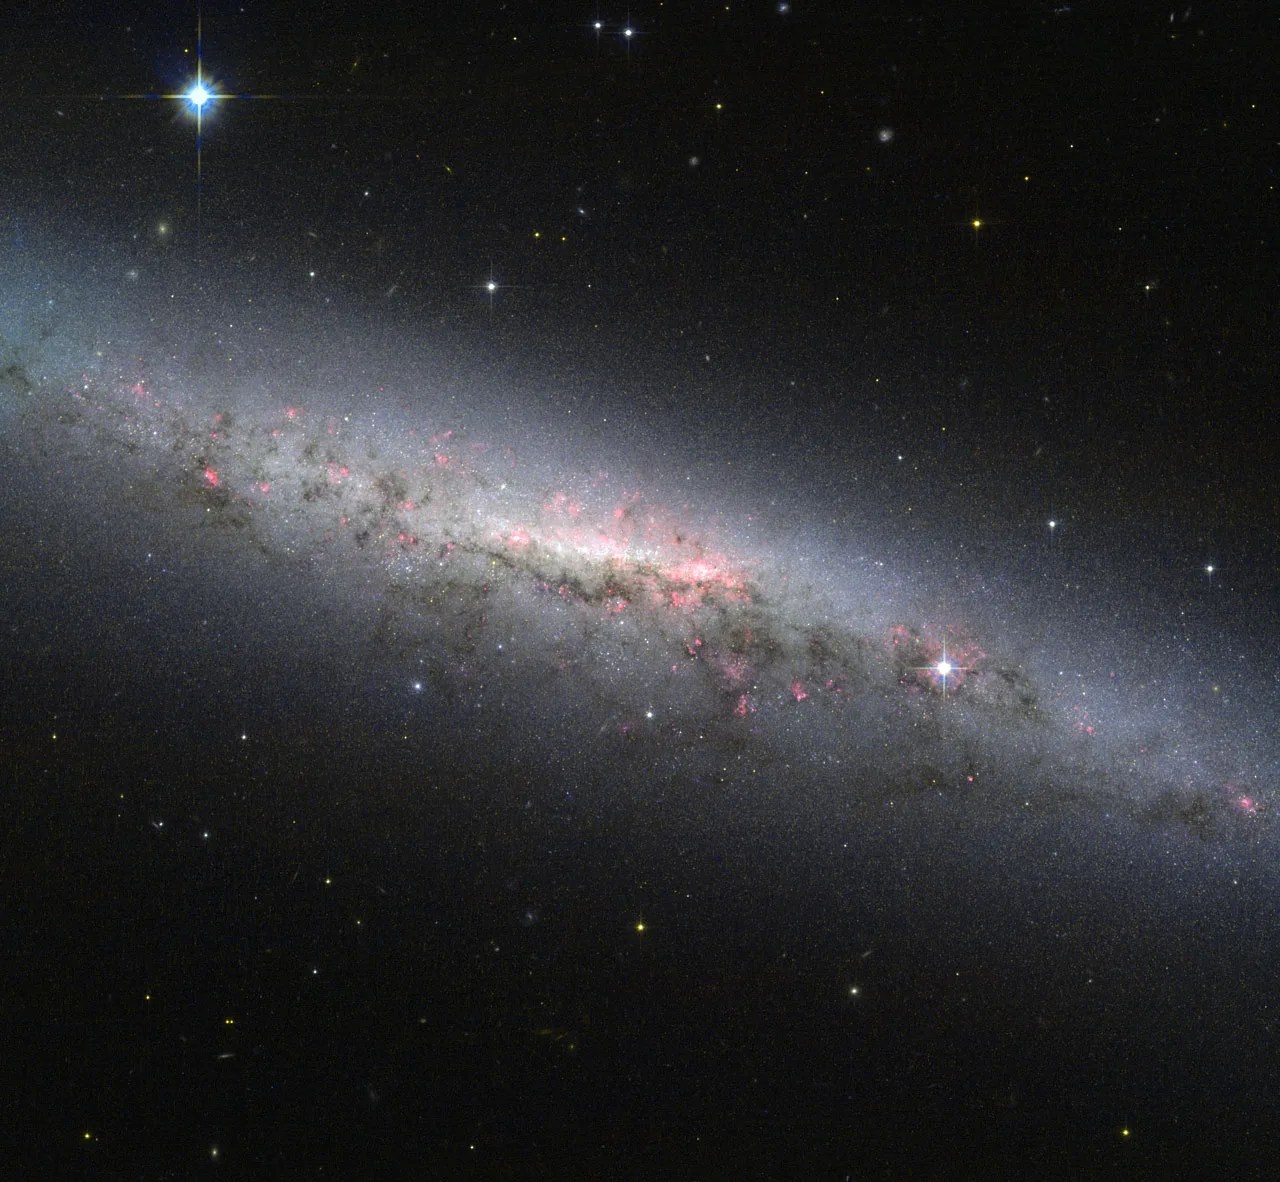 A pale milky galaxy seen on edge - with pink clusters of star-forming regions sprinkled through the center